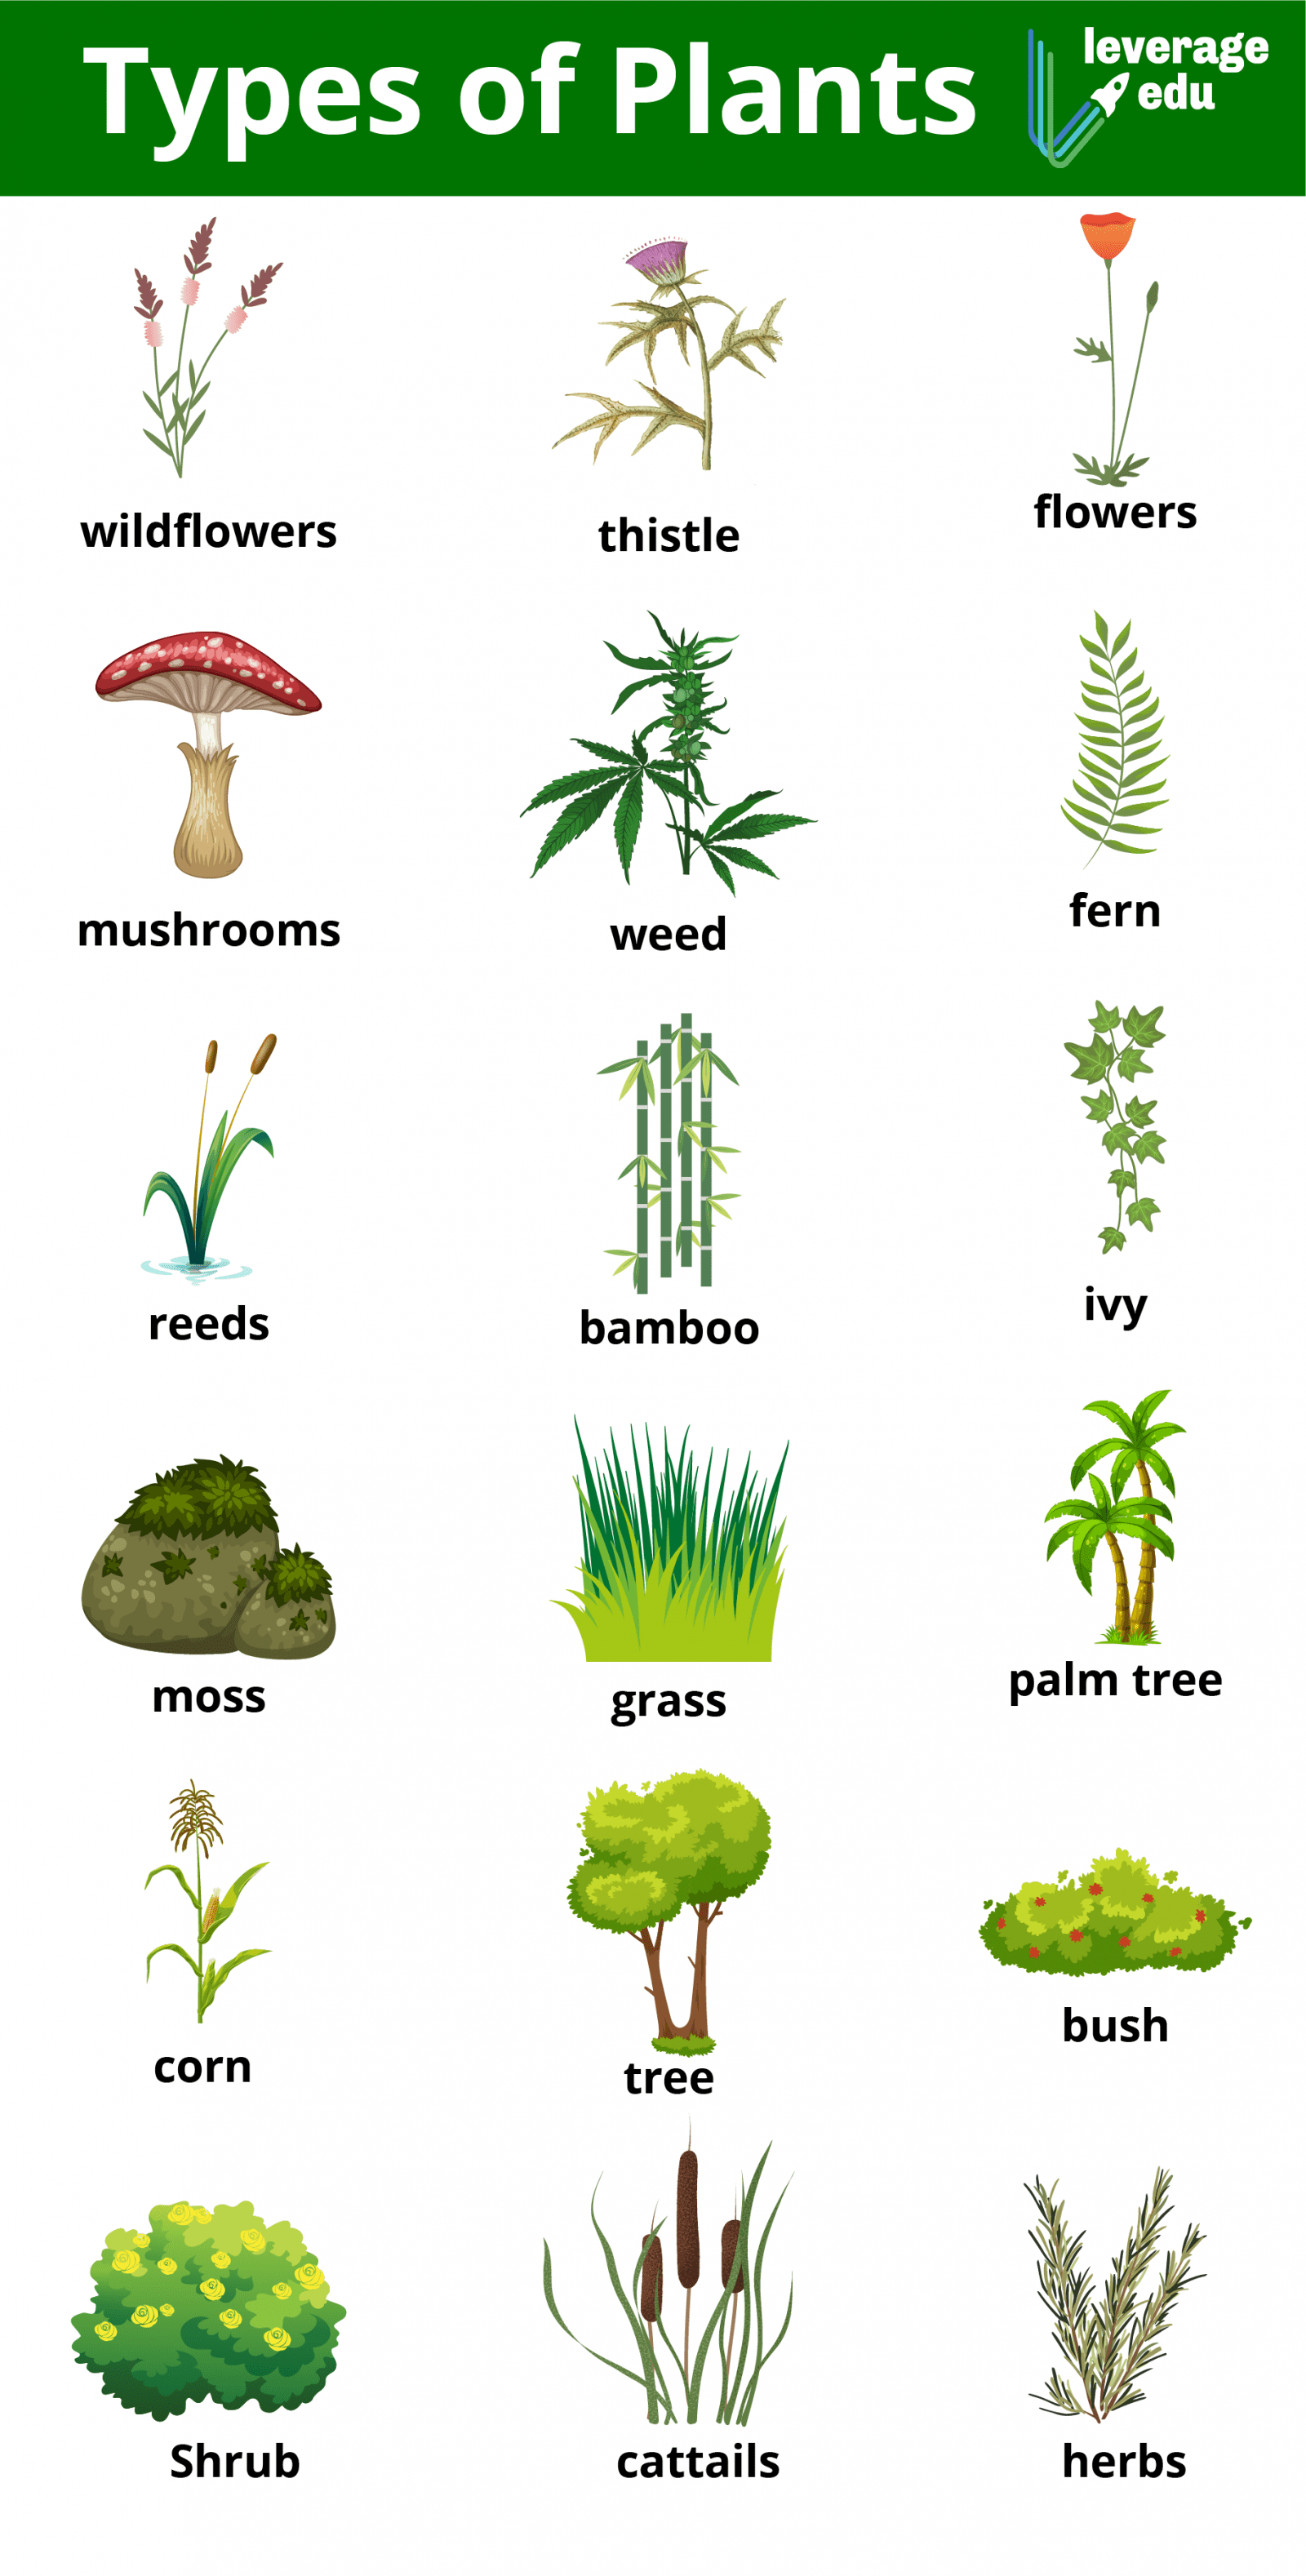 different-types-of-plants-by-life-cycle-seeds-size-leverage-edu